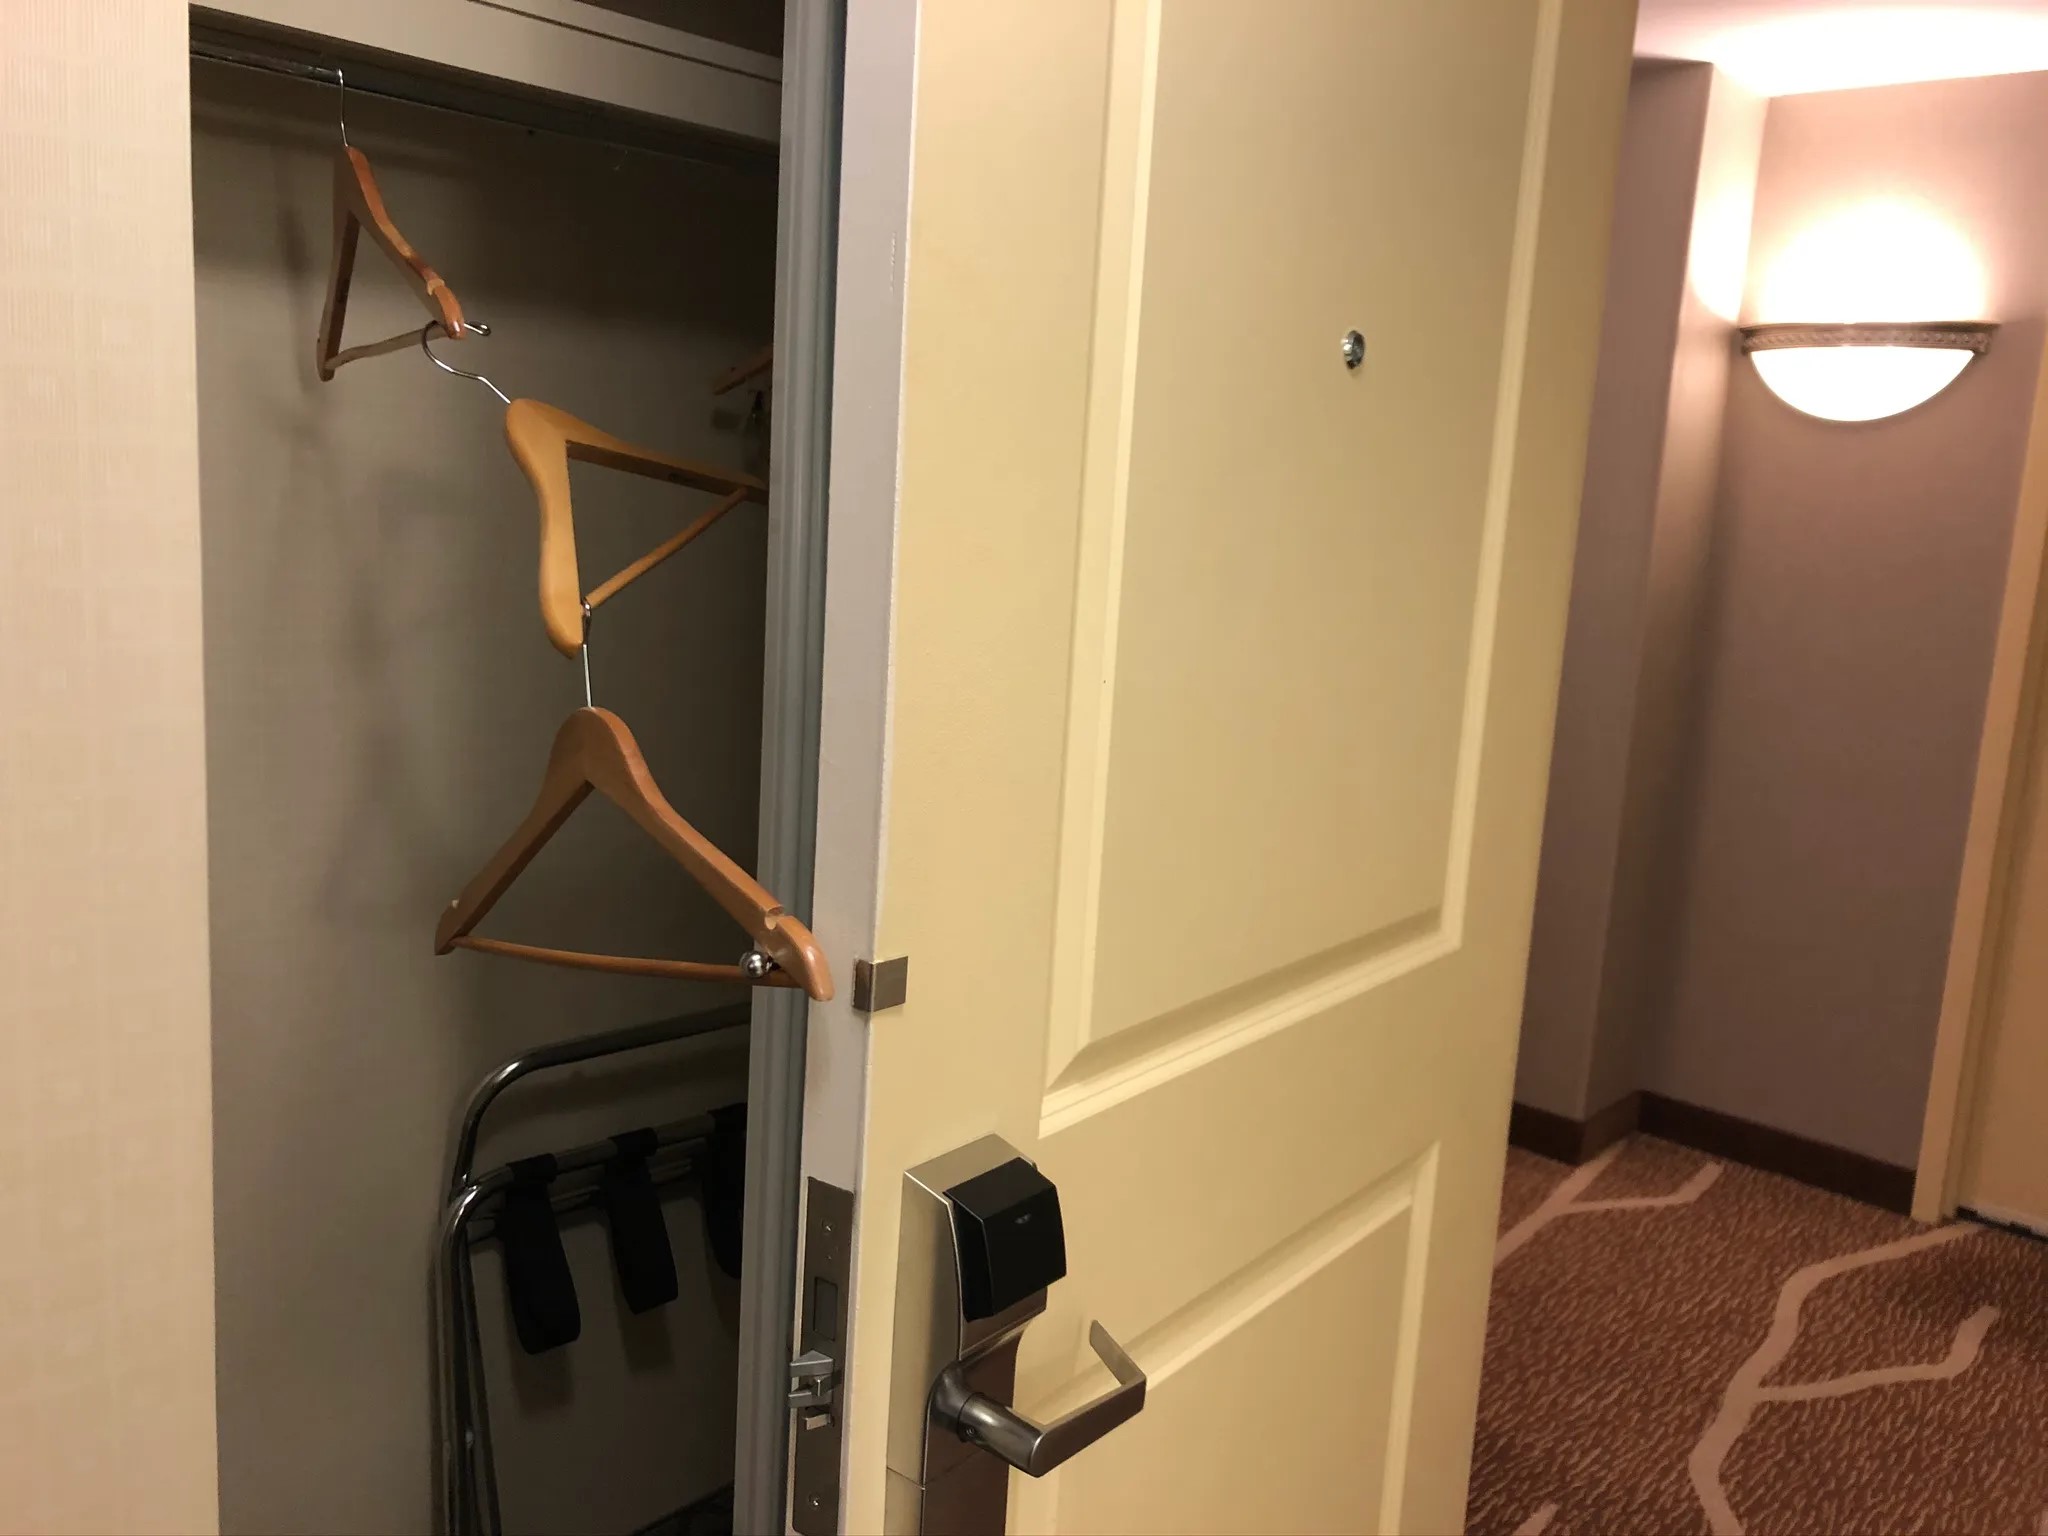 How To Lock A Hotel Door With A Hanger